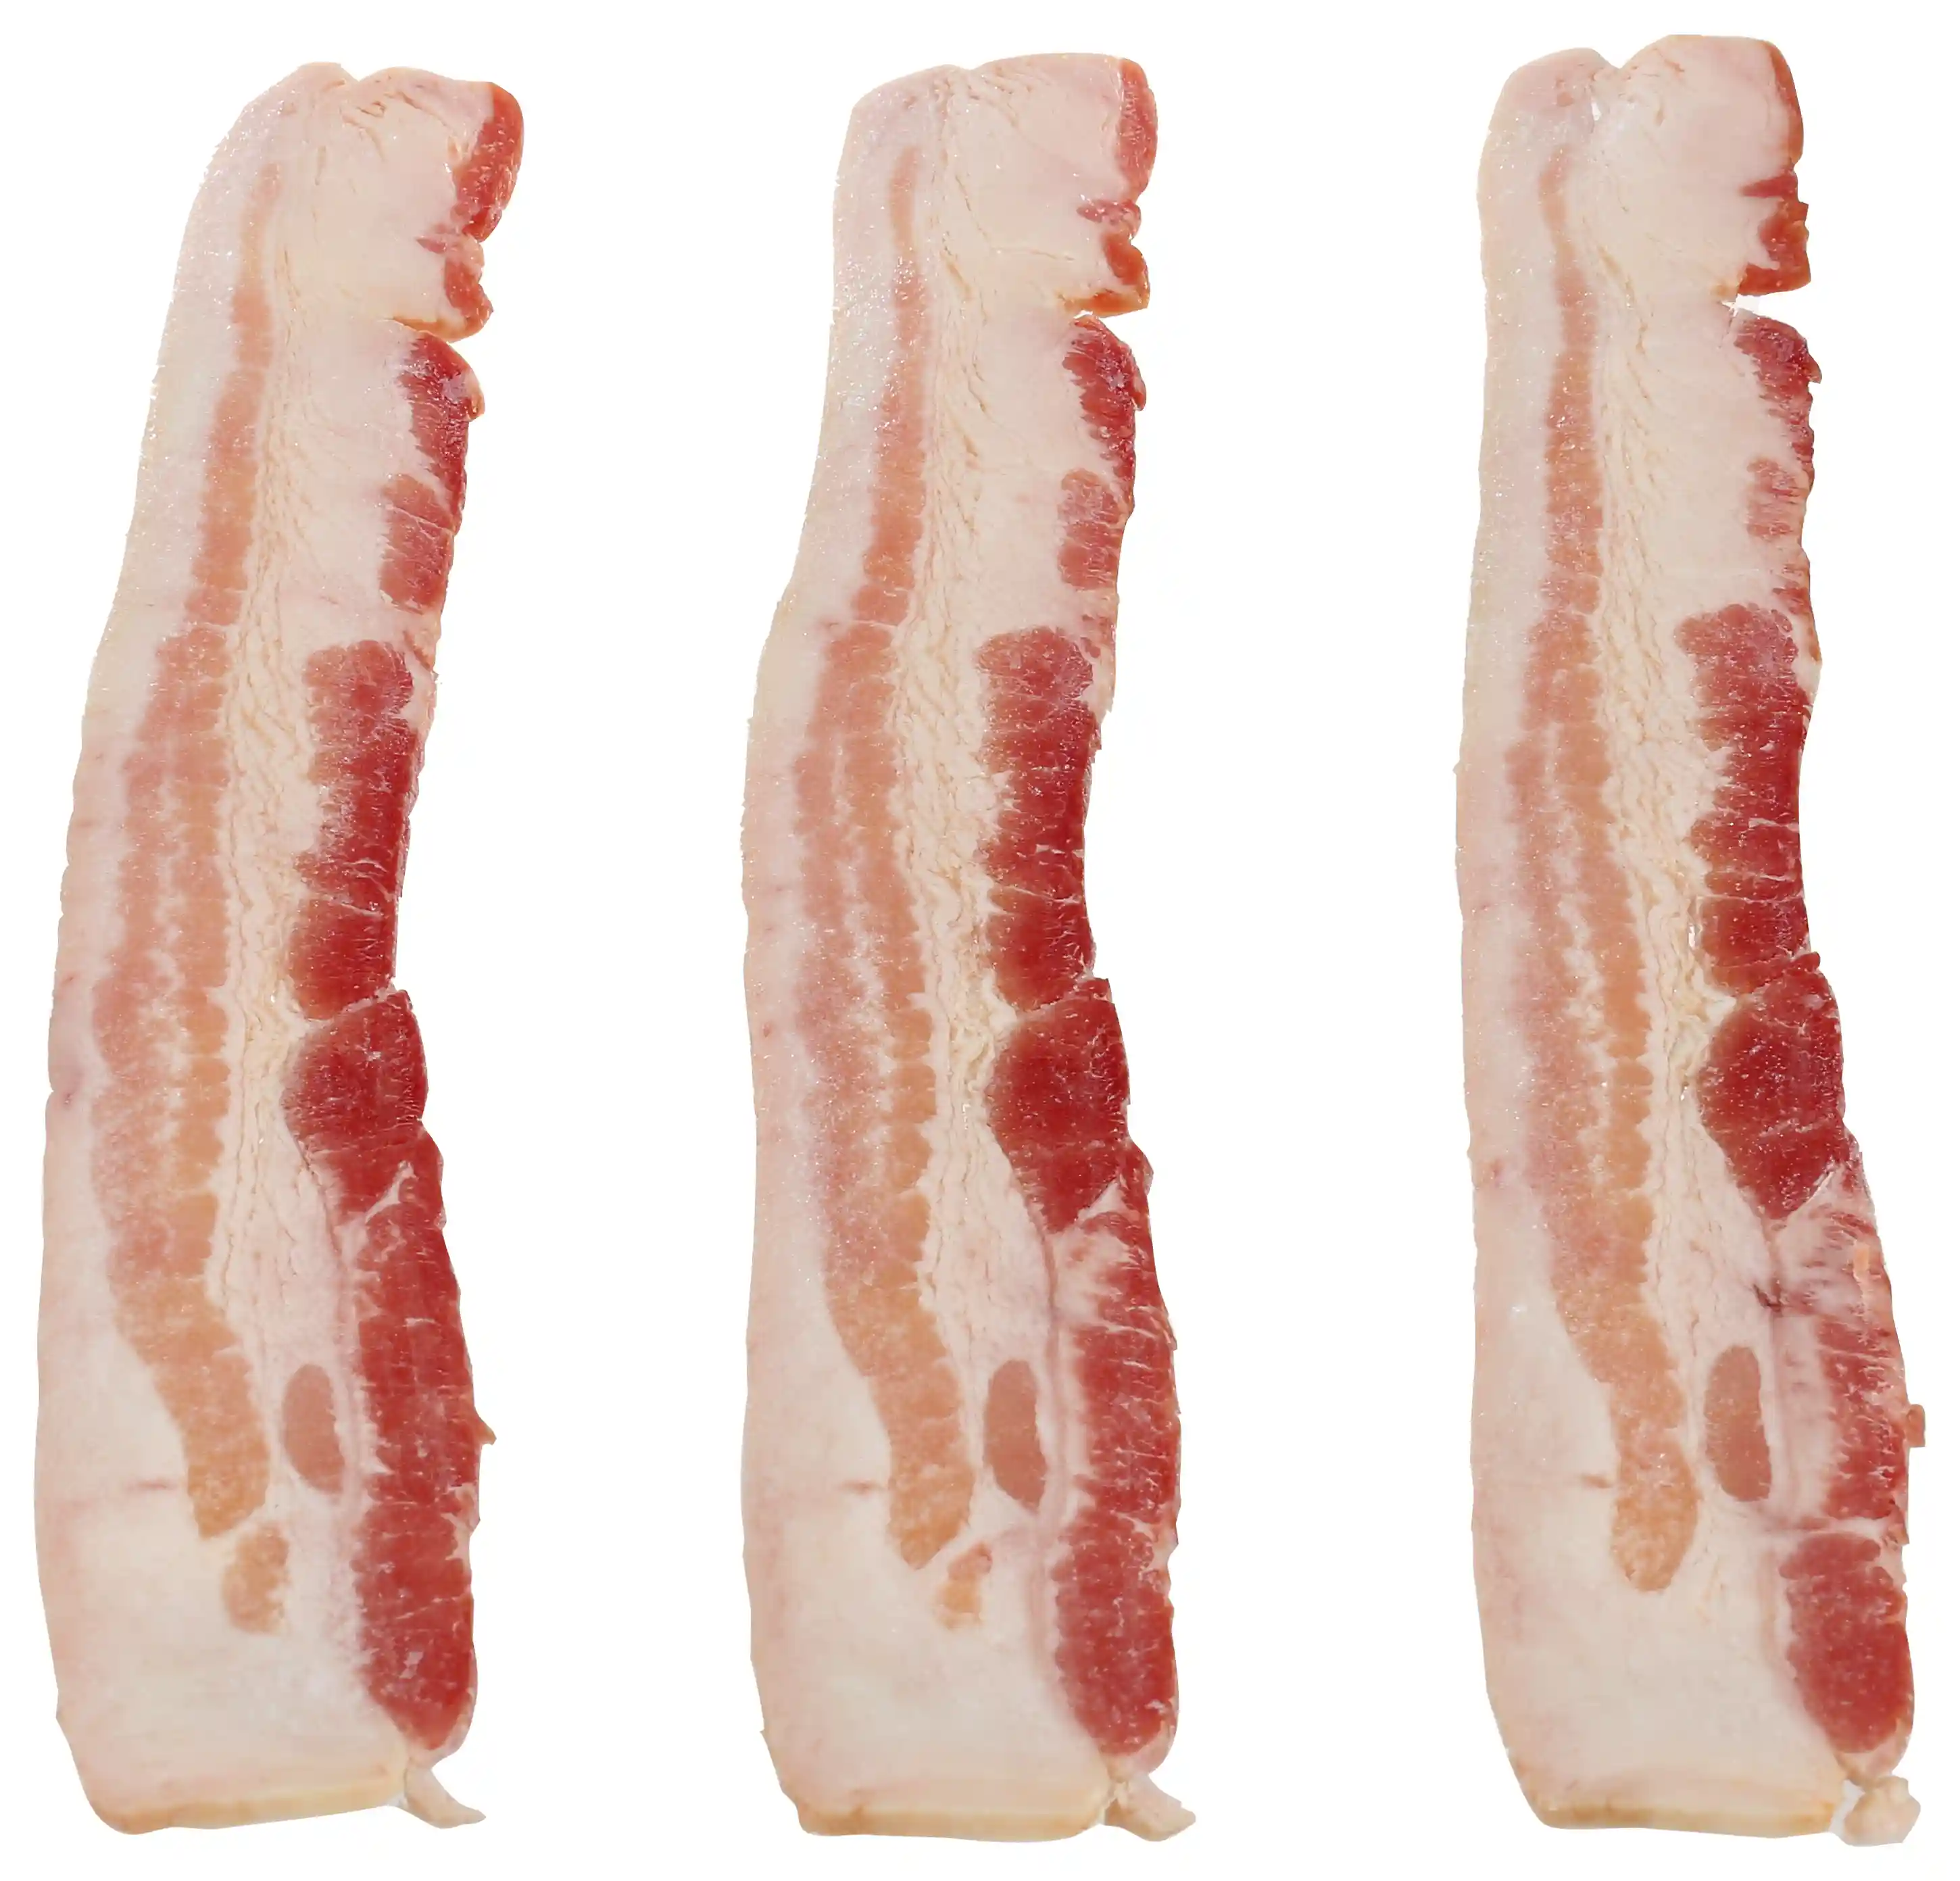 Wright® Brand Naturally Hickory Smoked Regular Sliced Bacon, Bulk, 30 Lbs, 14-18 Slices per Pound, Frozen_image_21